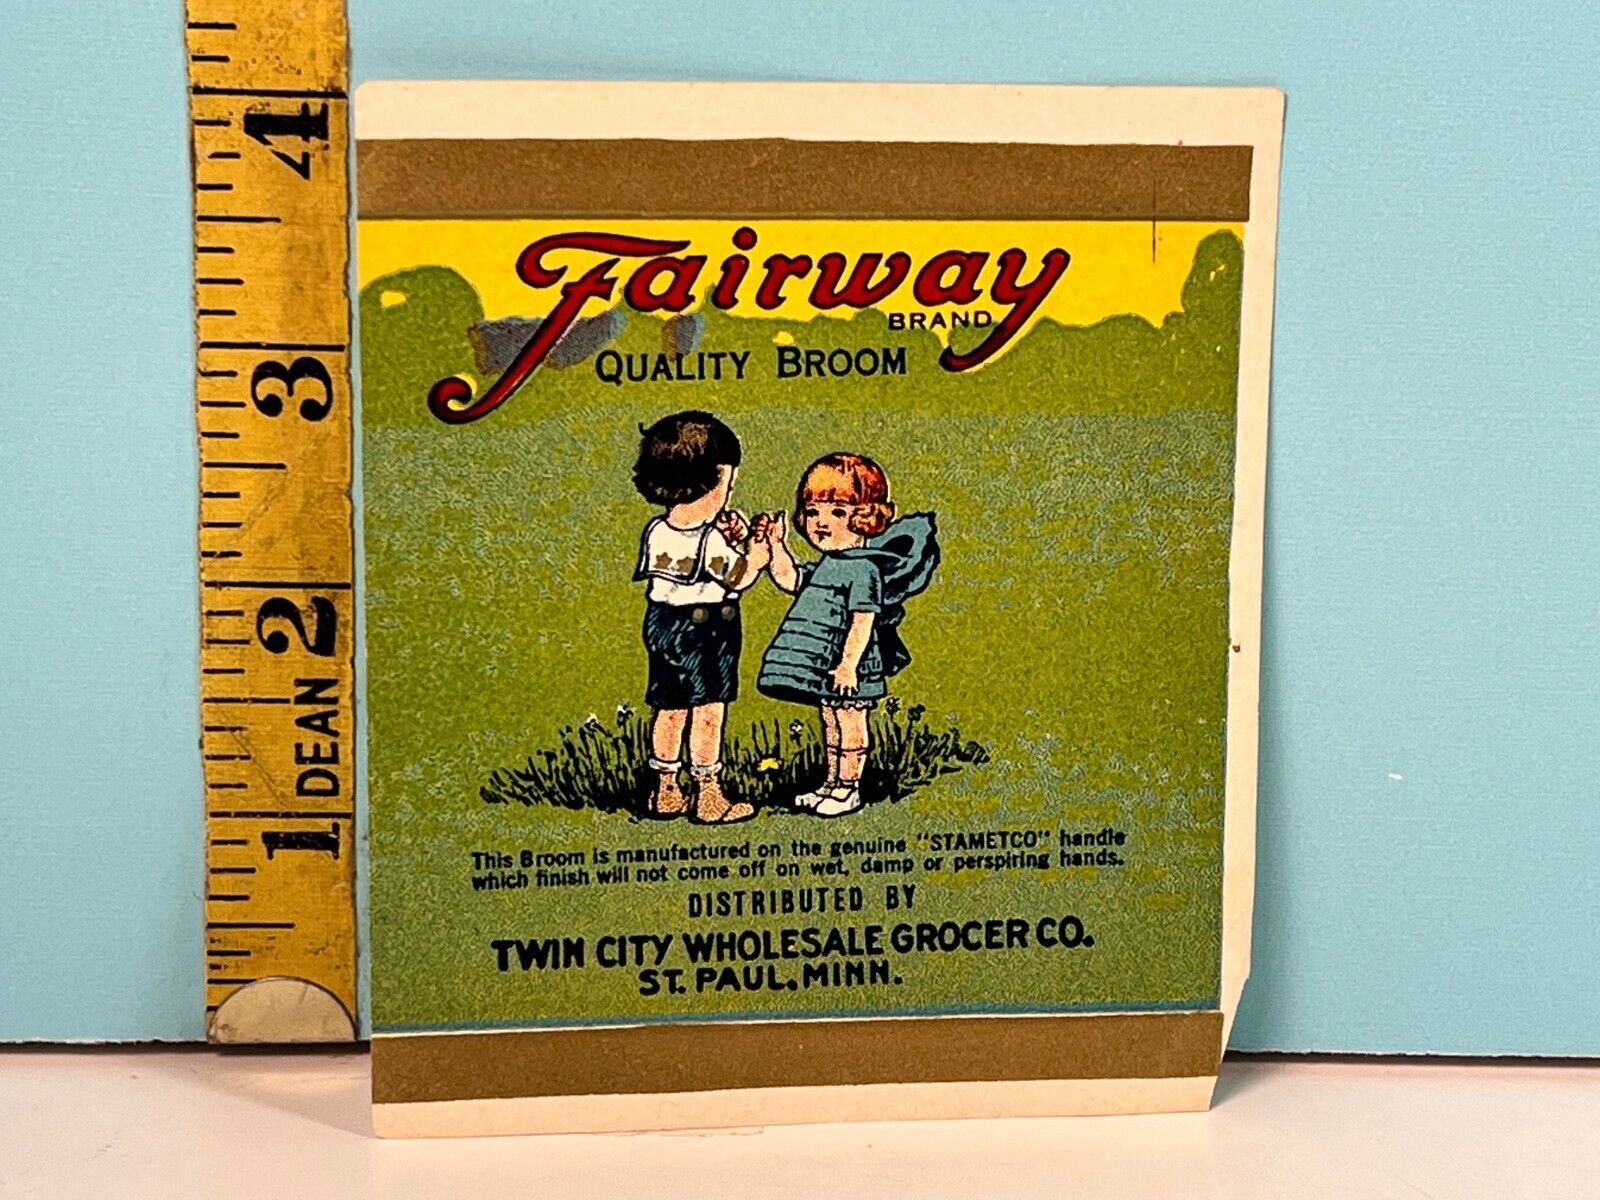 Vintage Fairway Quality Broom, Twin City Wholesale Grocer Co Adv Label.